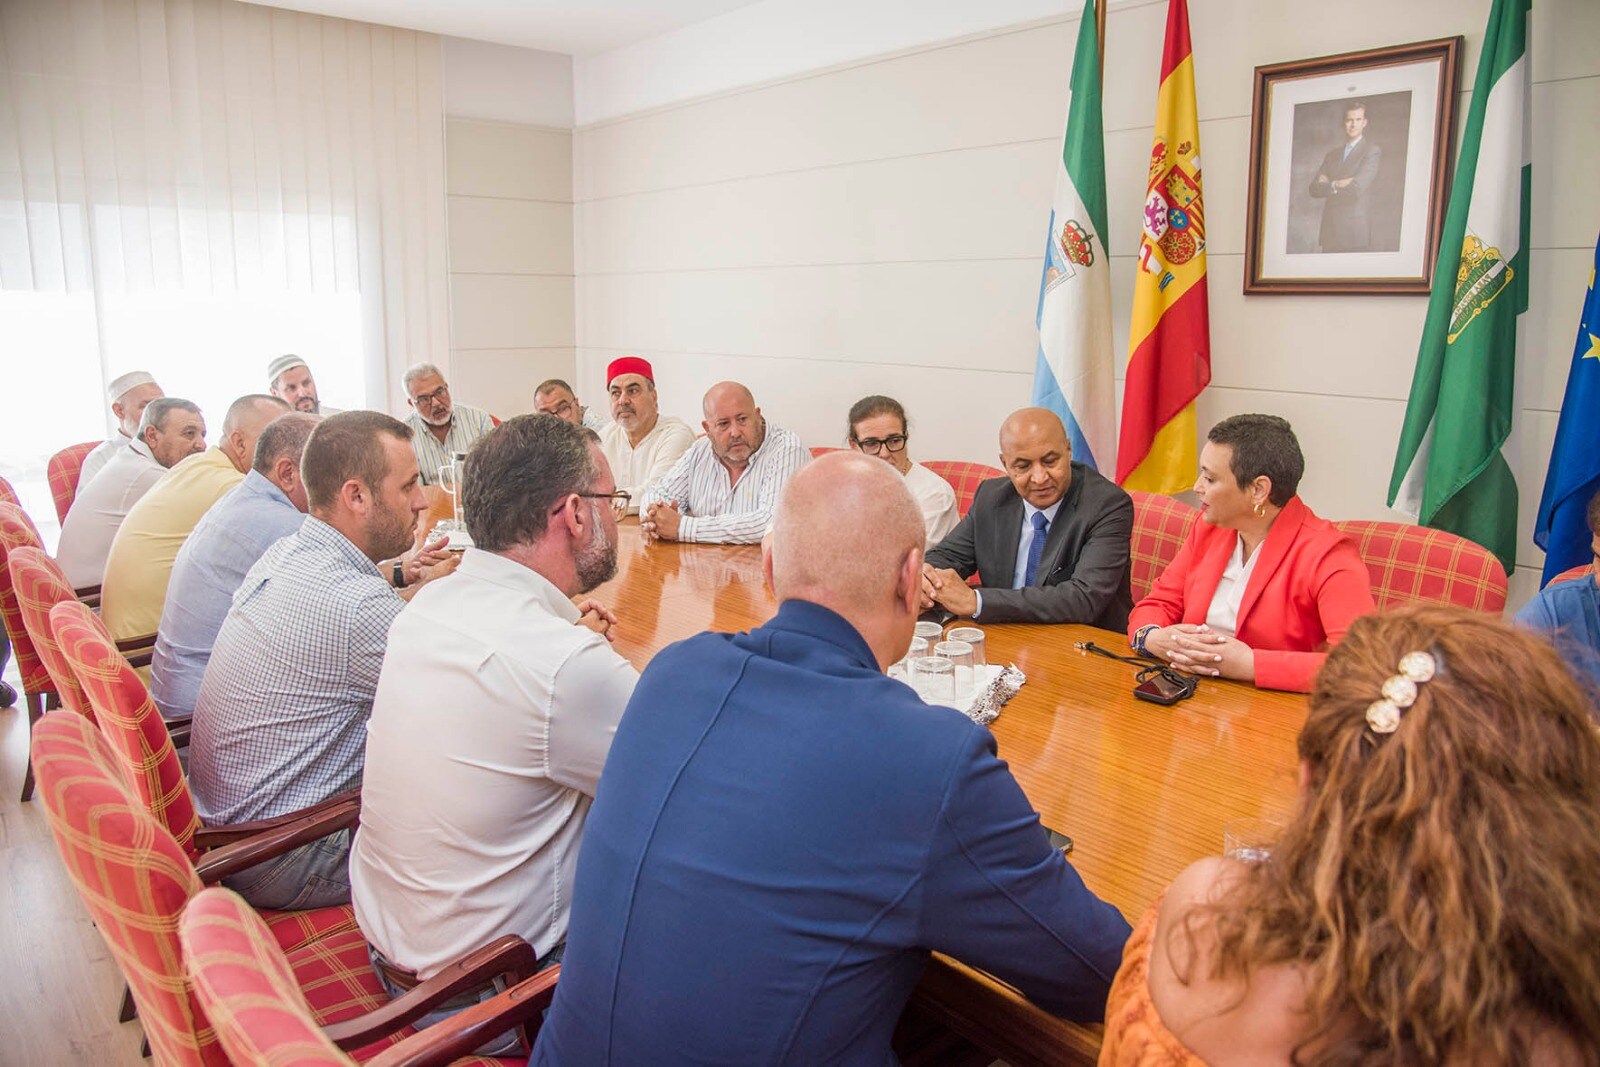 The Torremolinos meeting was attended by all political groups and members of the local Moroccan community.